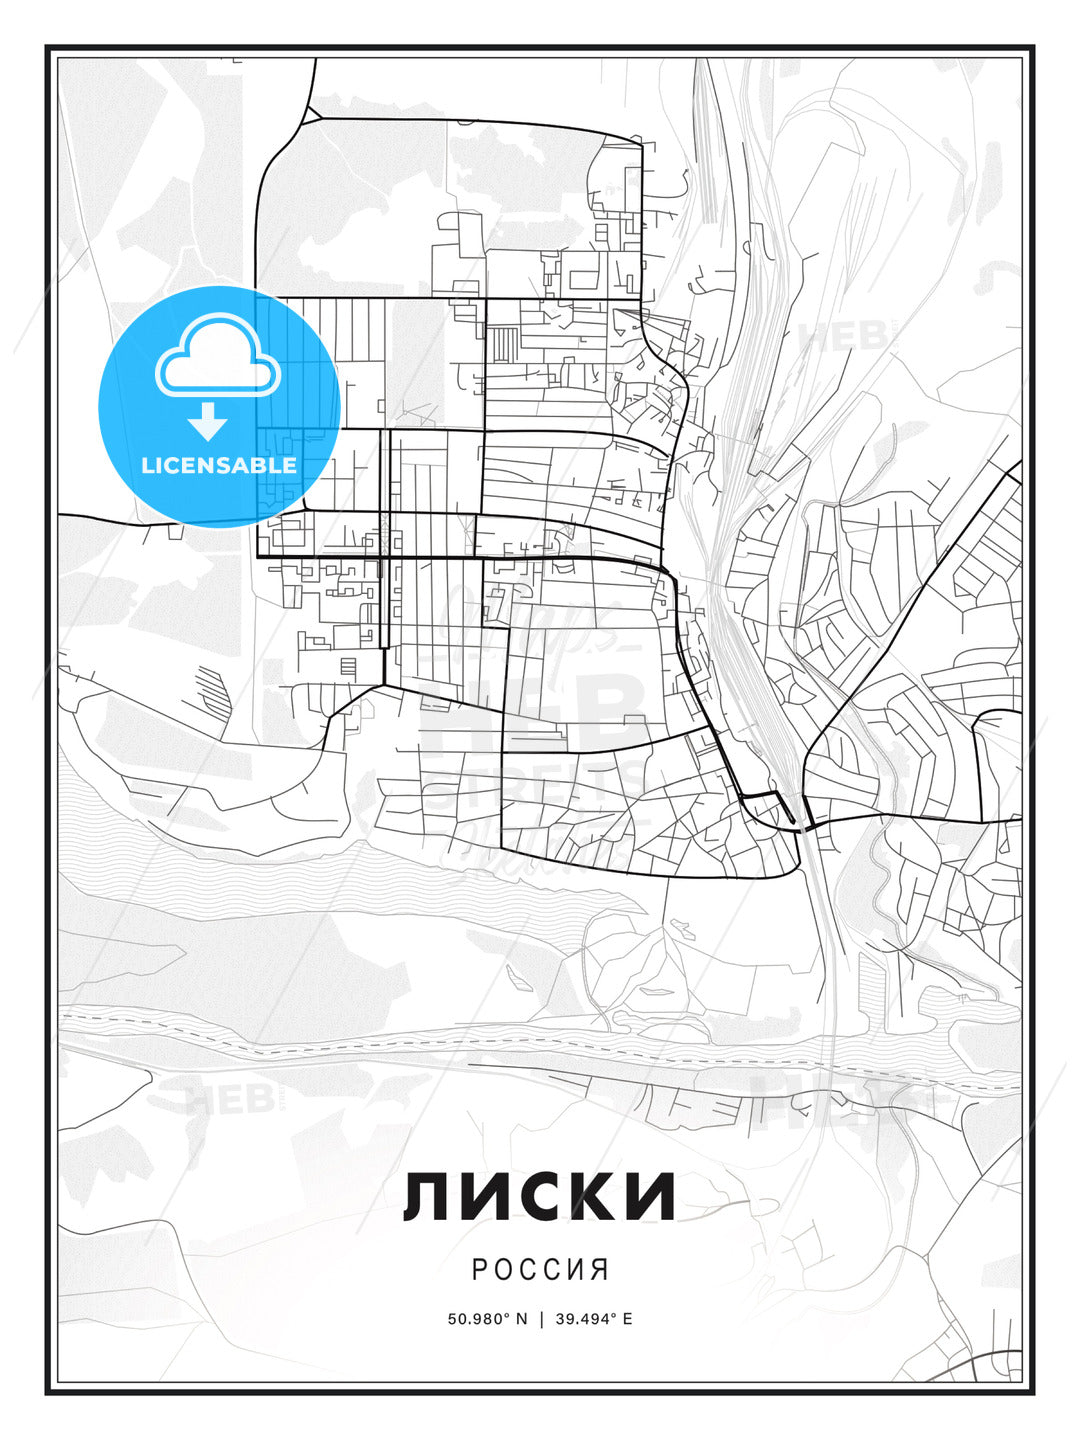 ЛИСКИ / Liski, Russia, Modern Print Template in Various Formats - HEBSTREITS Sketches